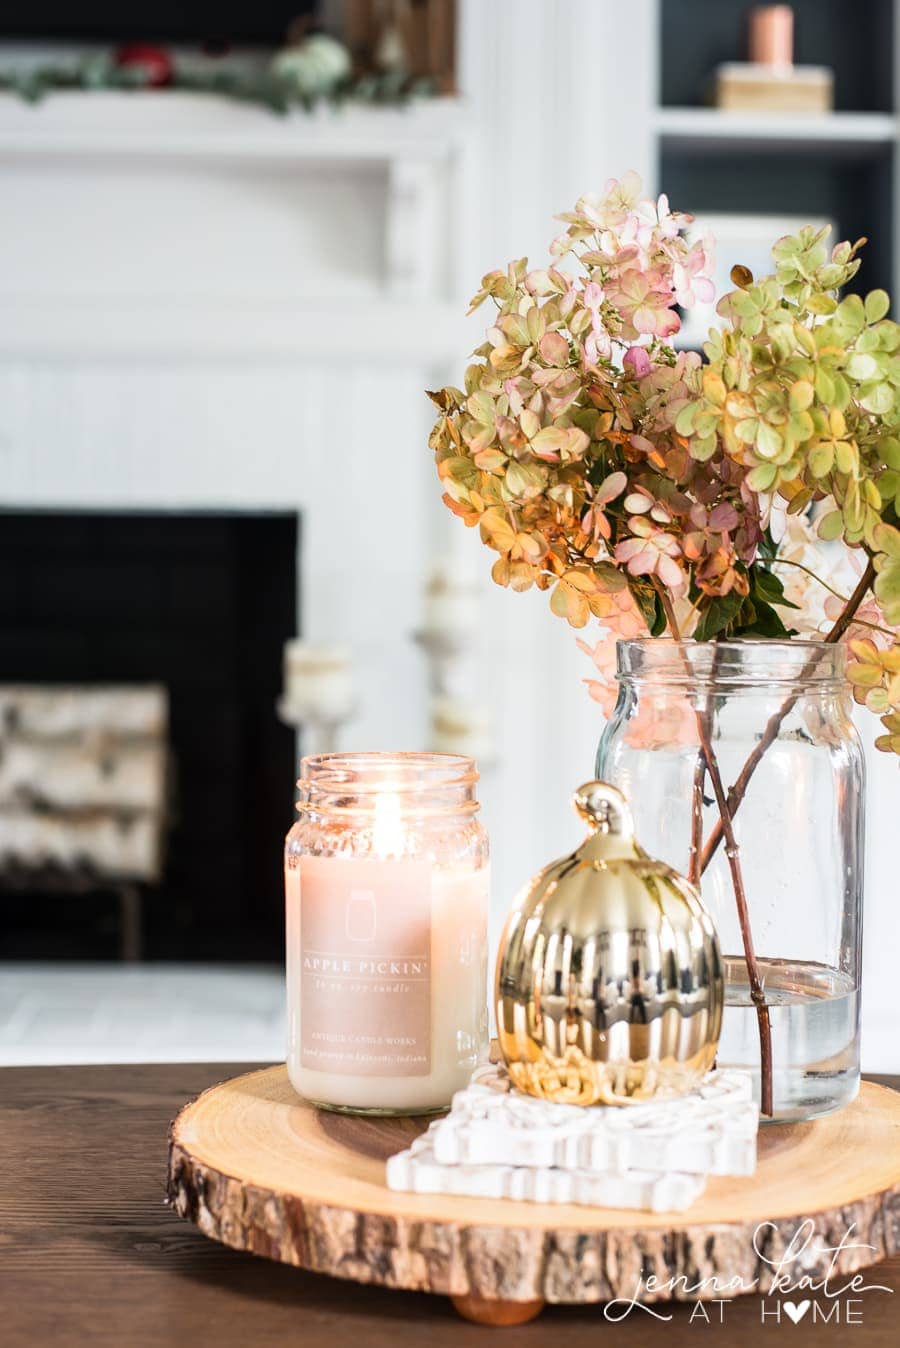 A rustic wooden tray holding a clear vase of fall greenery, a pink candle and a golden pumpkin resting on white, textured coasters